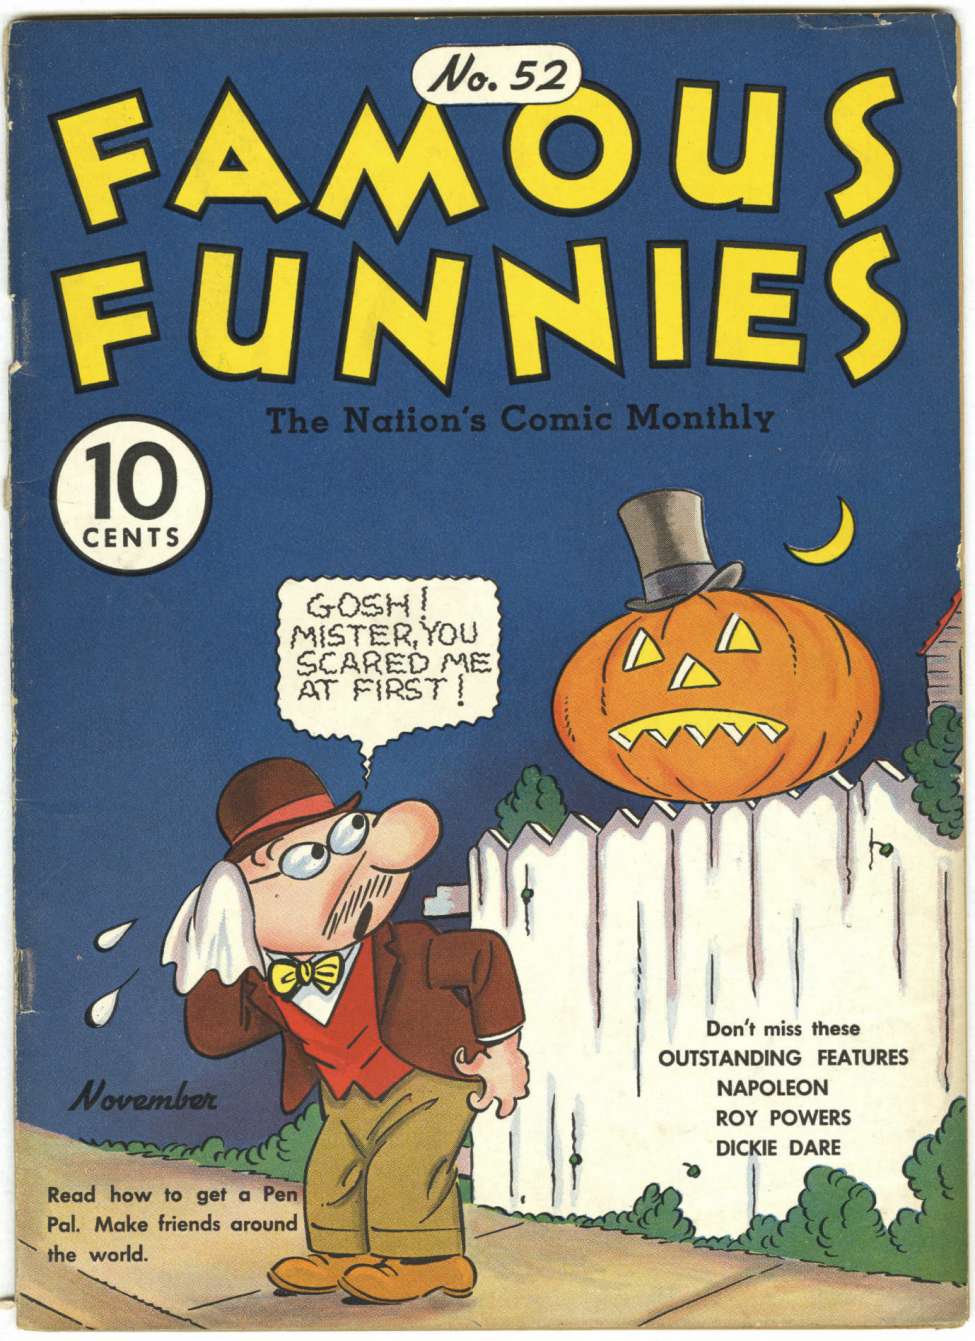 Book Cover For Famous Funnies 52 - Version 2